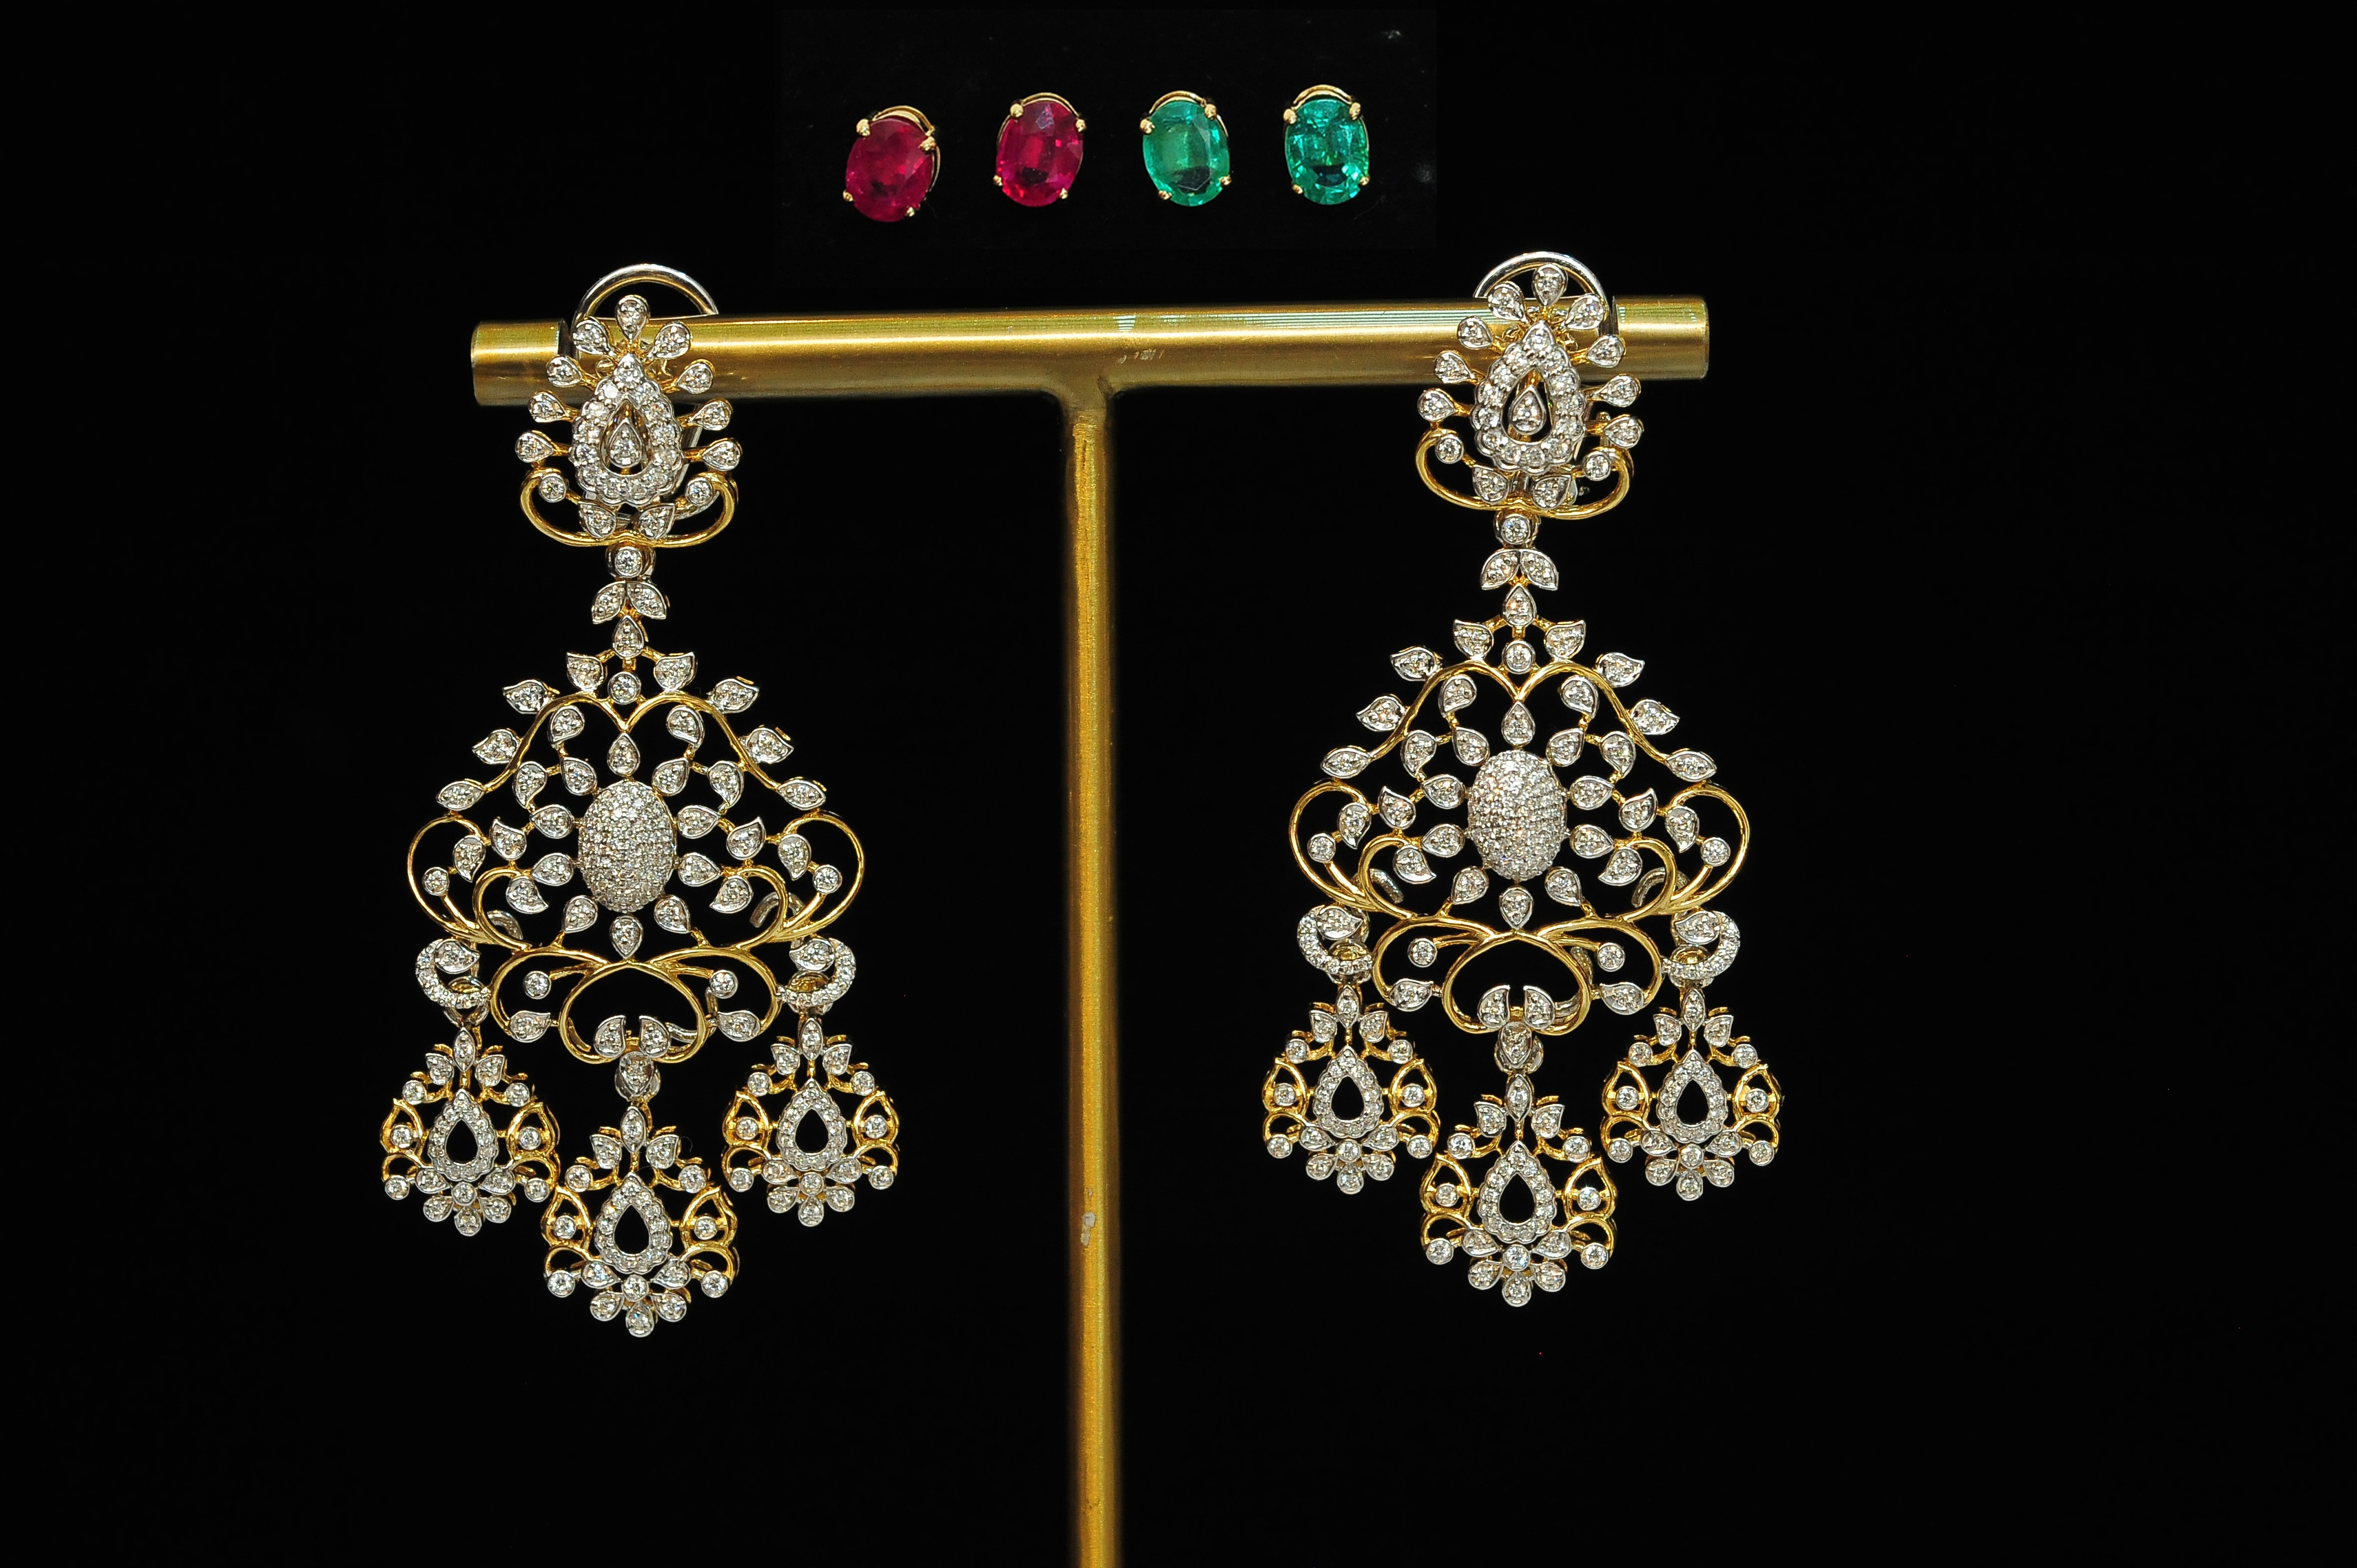 Diamond Earrings with changeable Natural Emeralds/Rubies.